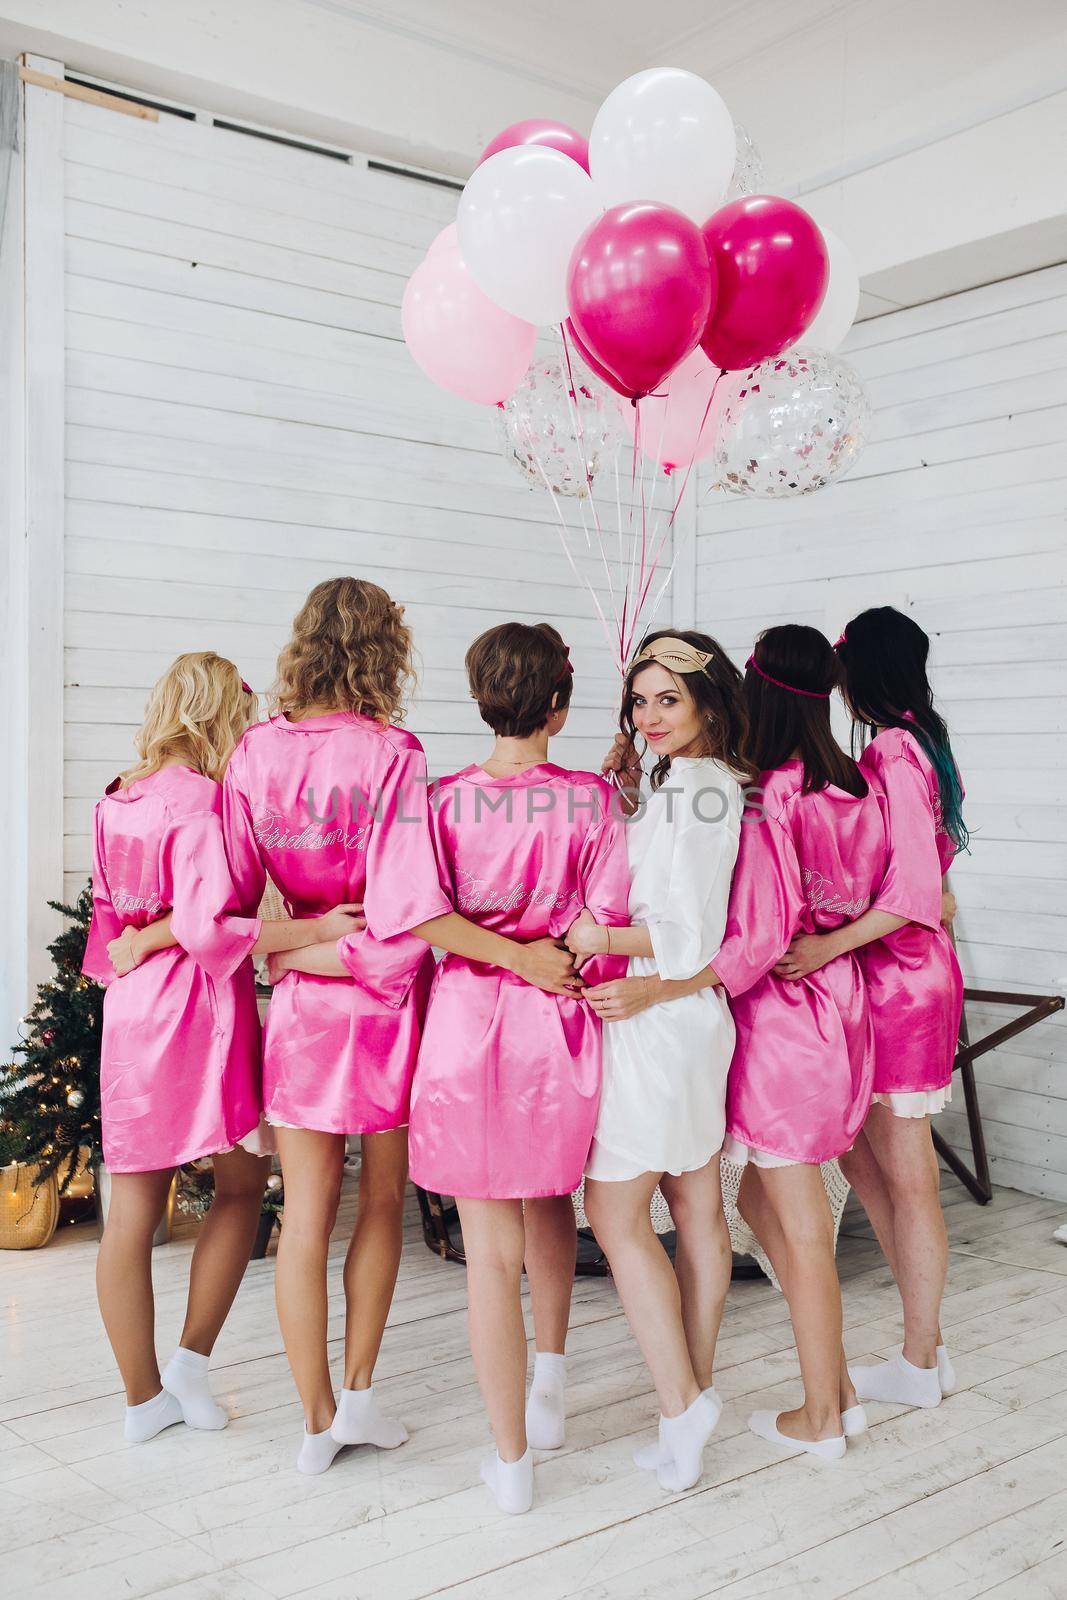 Studio shot of bride-to-be in white robe standing with her bridesmaids in pink robe back to camera with bunch of air balloons.